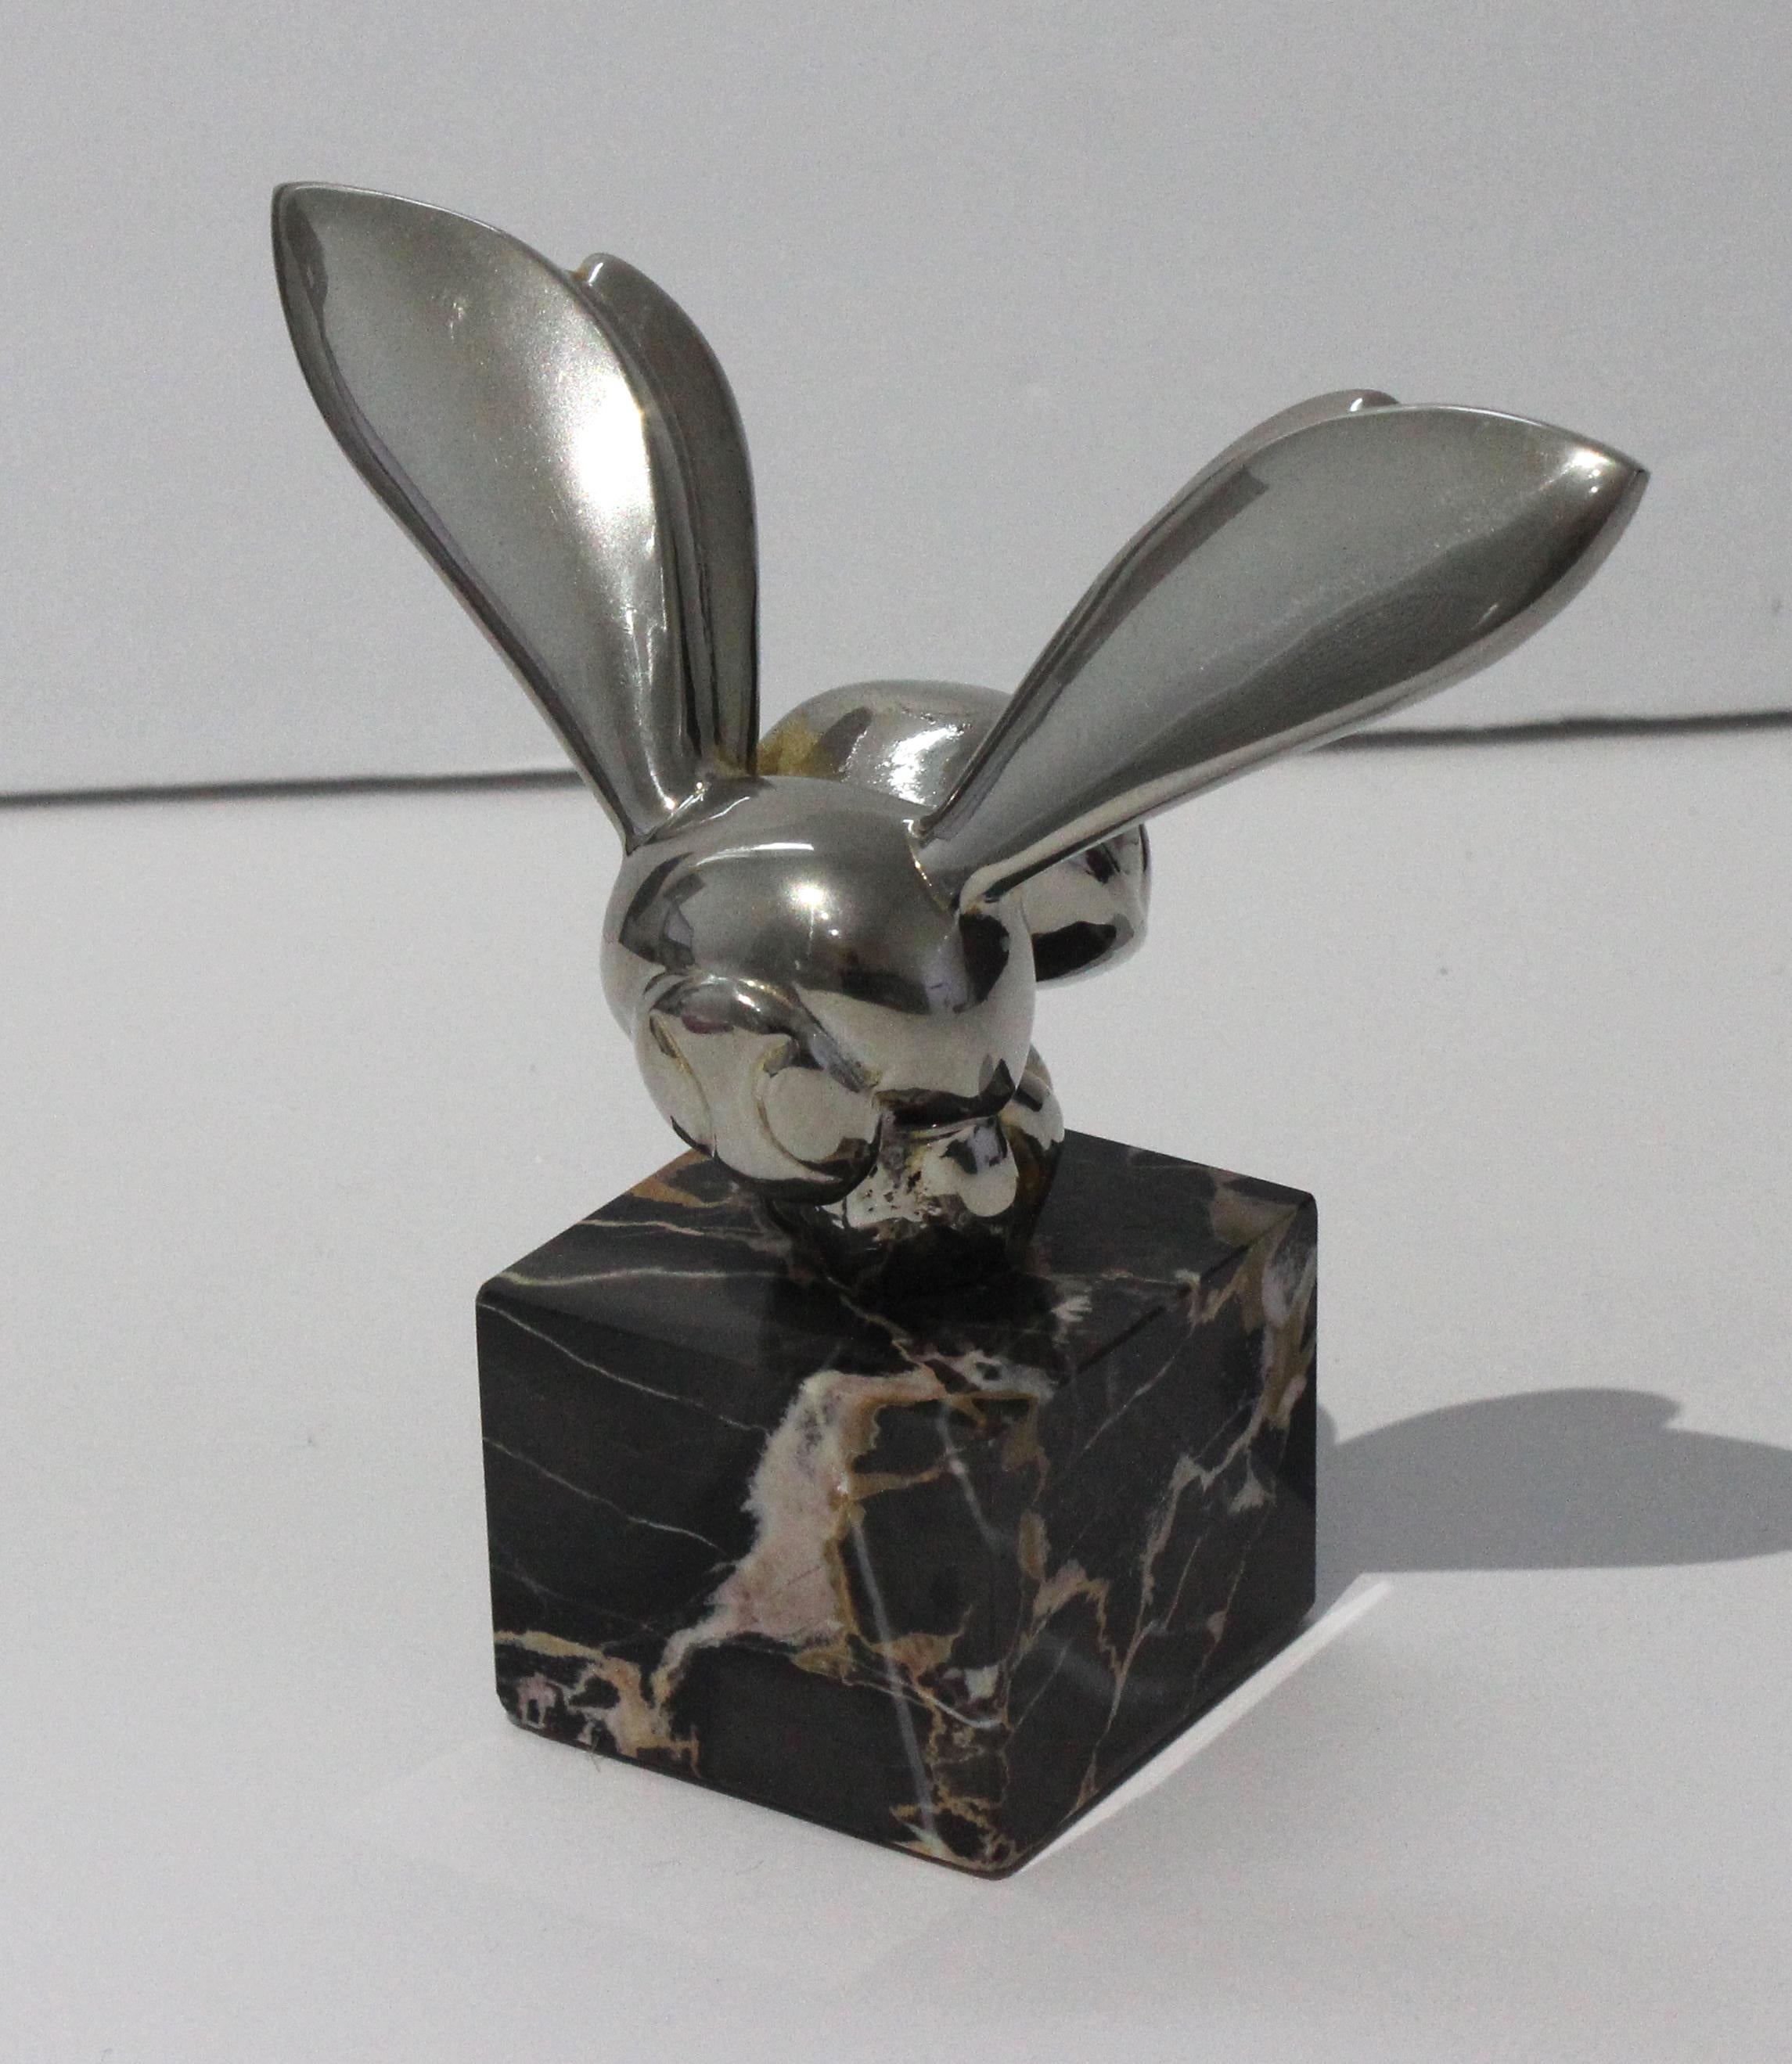 This stylish bee figure sculpture is an authorized museum replica by Alva Studios and was produced in the late 1970s. The original by G. Lachaise is in the Philadelphia Museum of Art.

There were not two options in the Museum store - a gold vs a